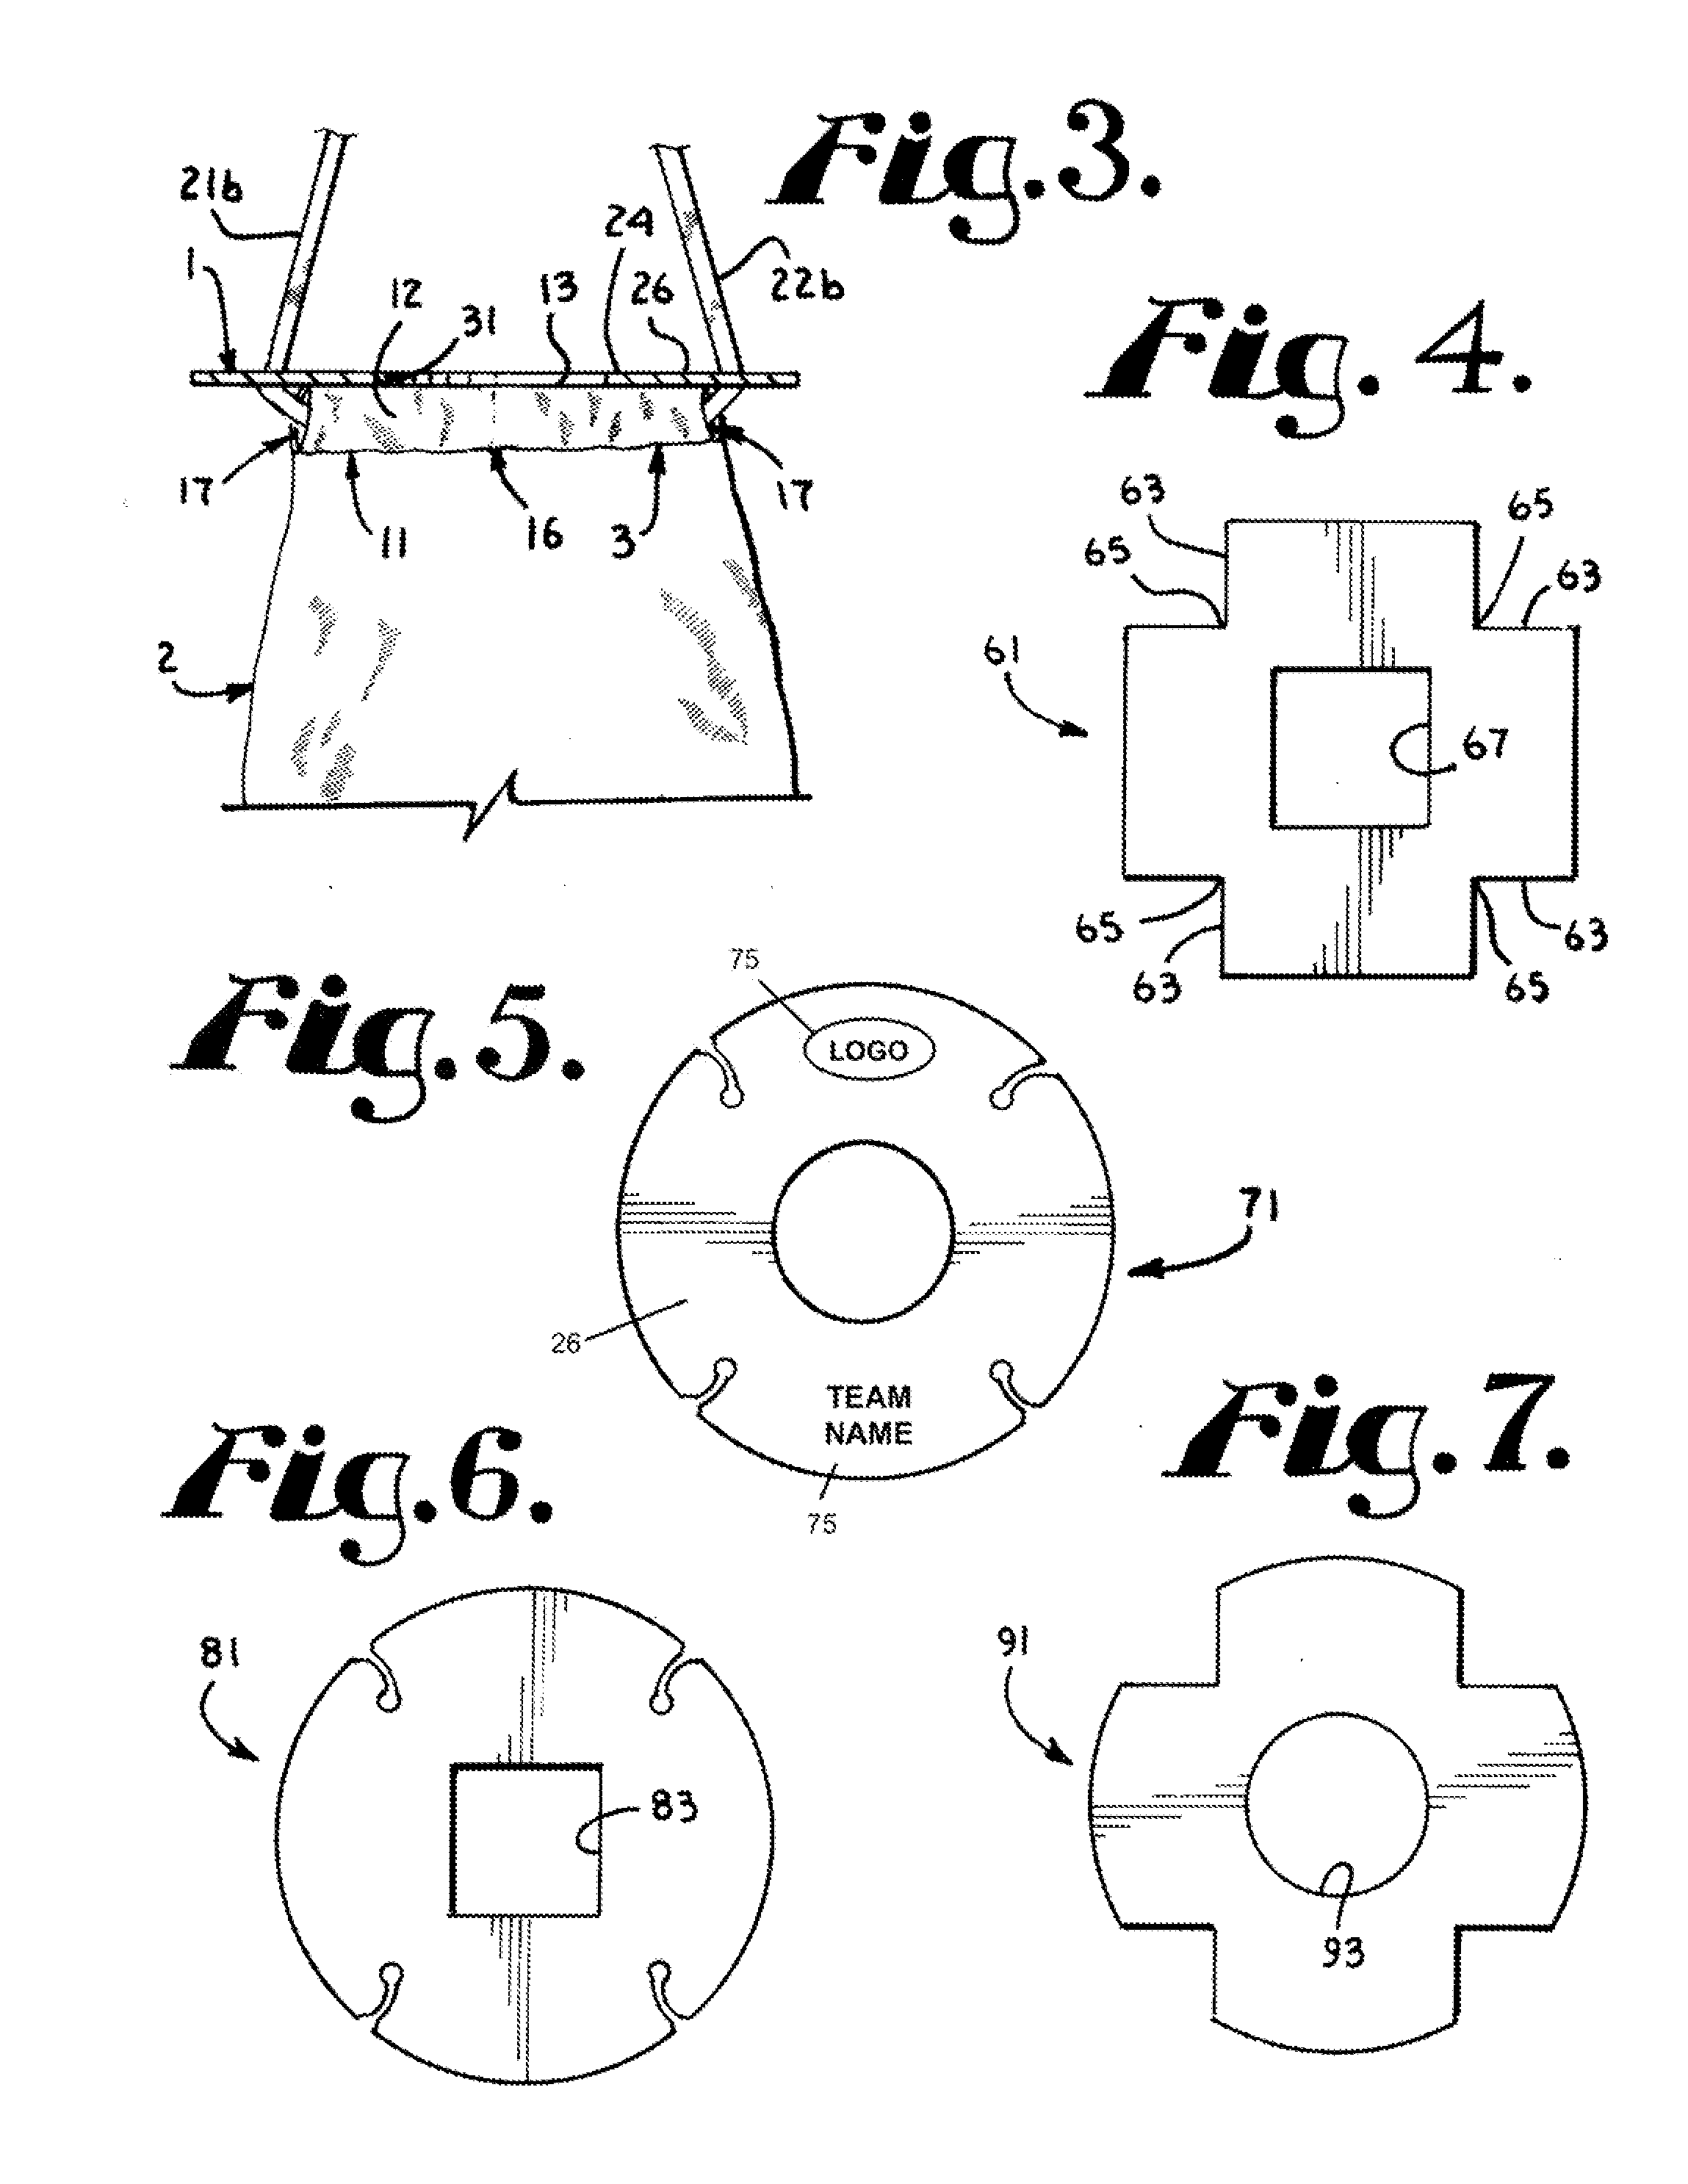 Trash bag supporting device